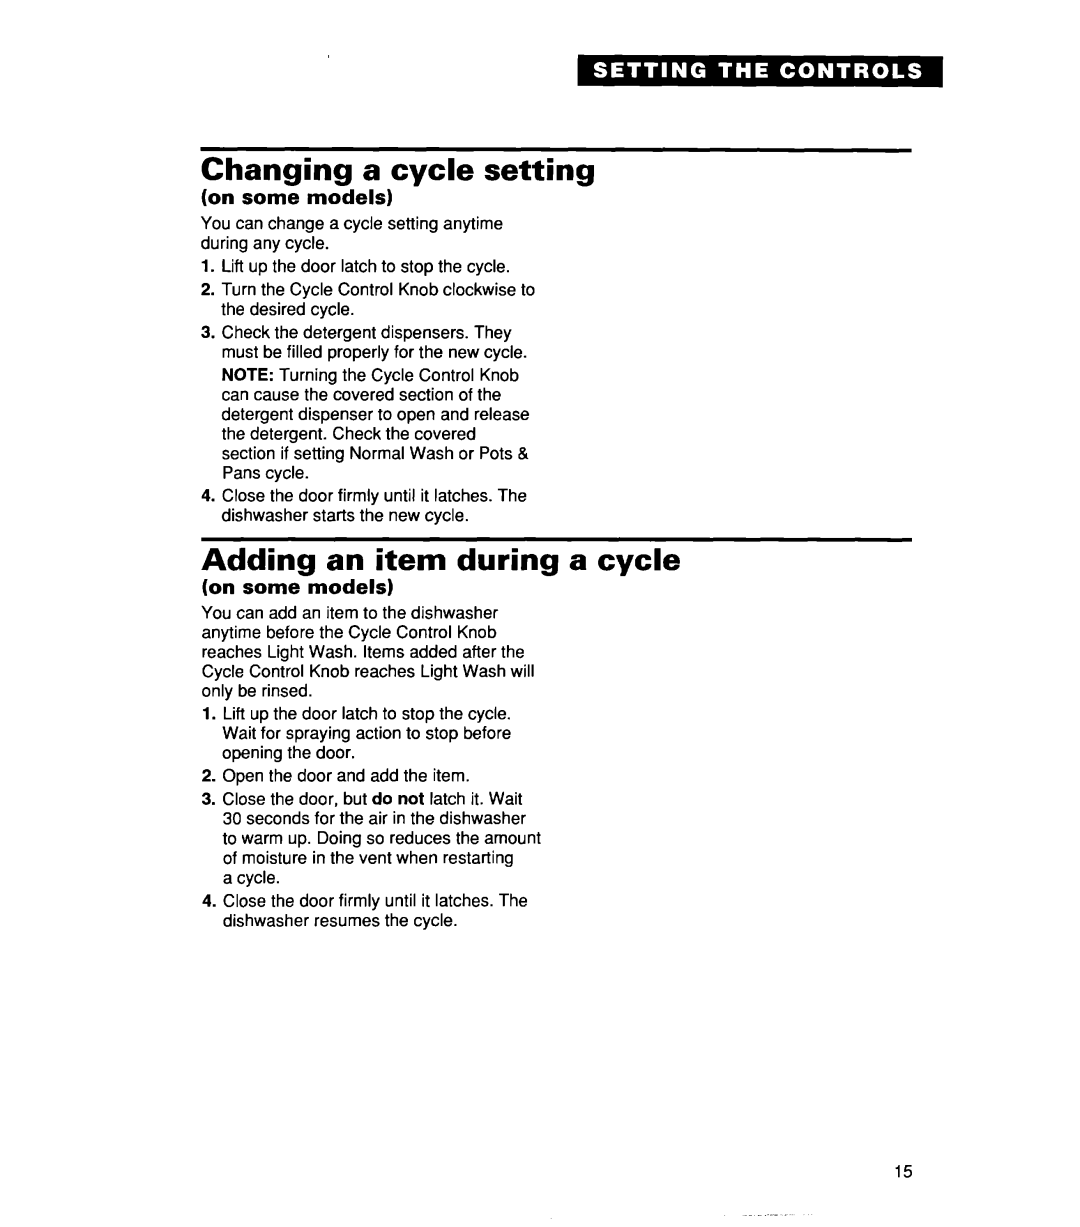 Whirlpool Series 400, 806, 830 warranty Changing a cycle setting, Adding an item during a cycle, on some models 